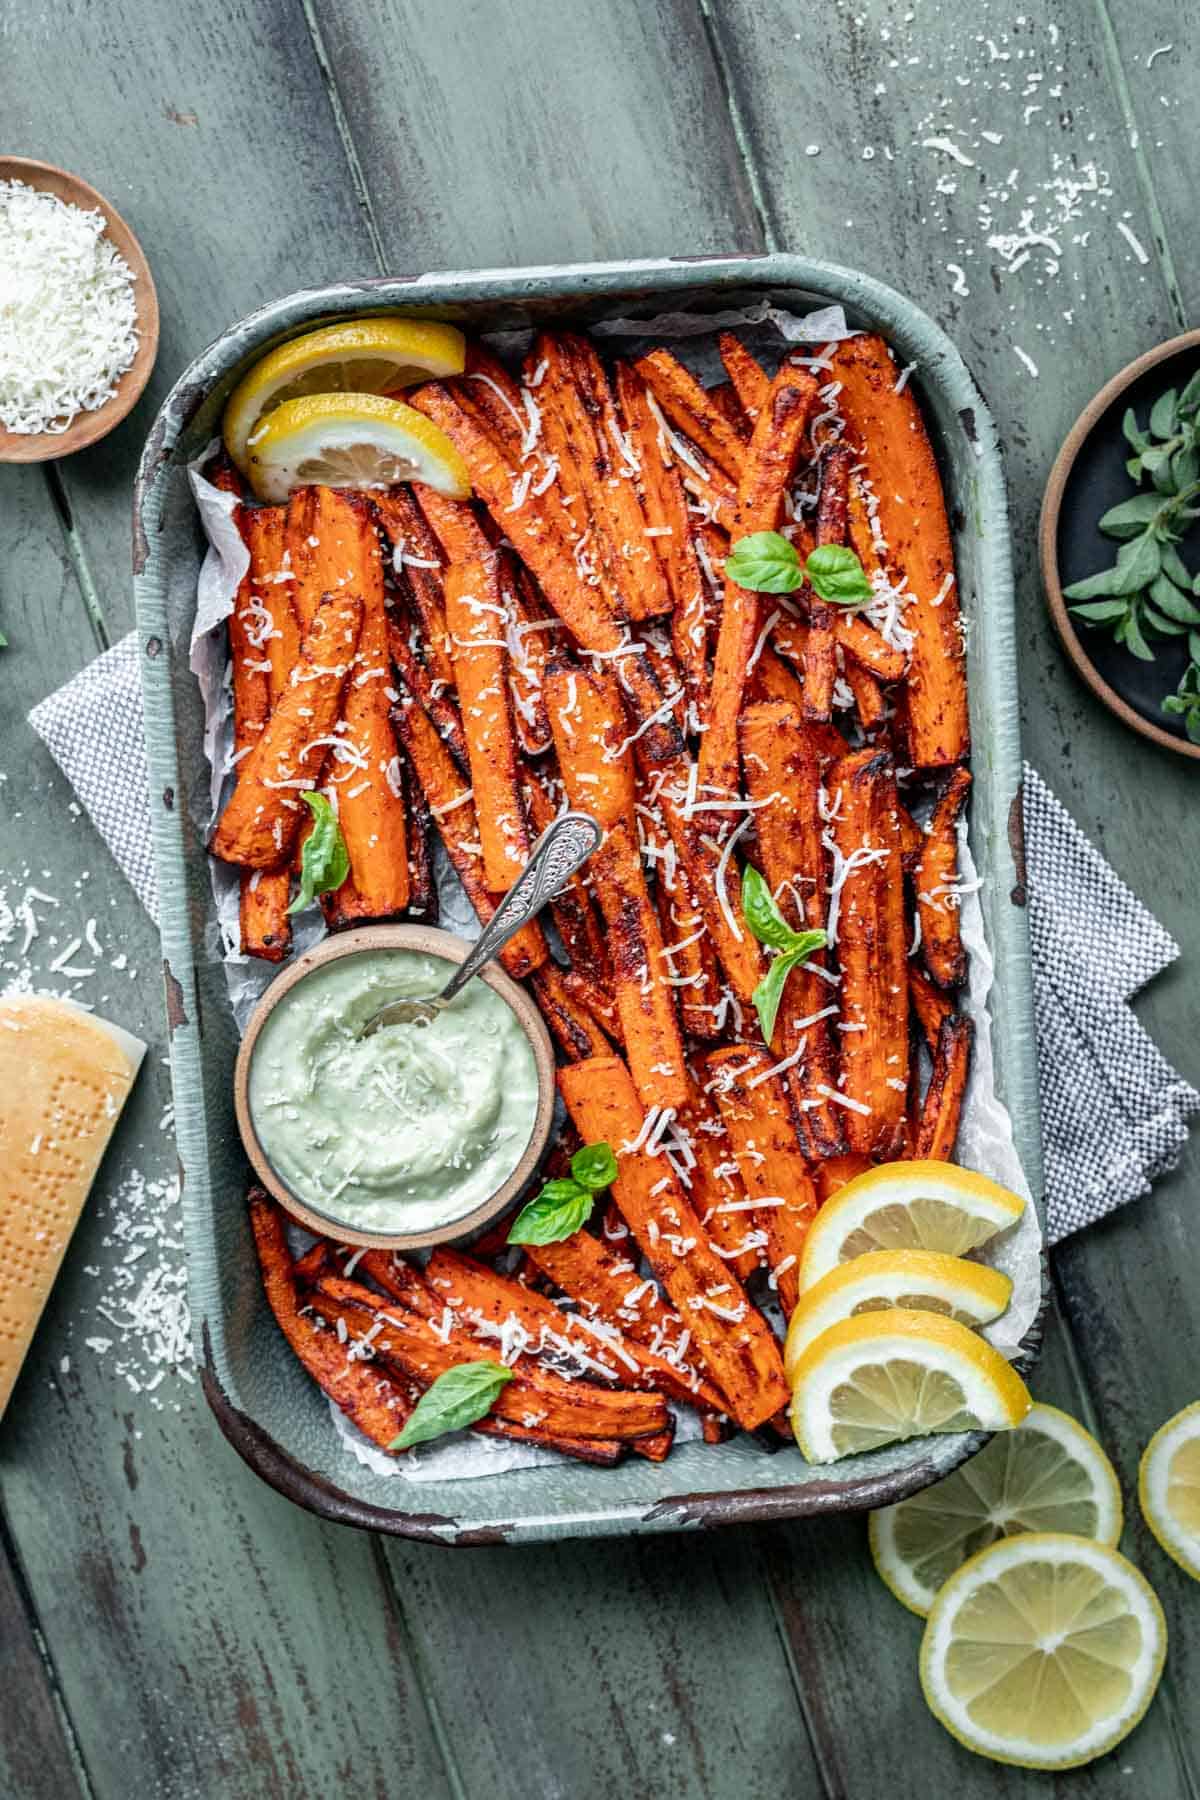 a dish of carrot fries.